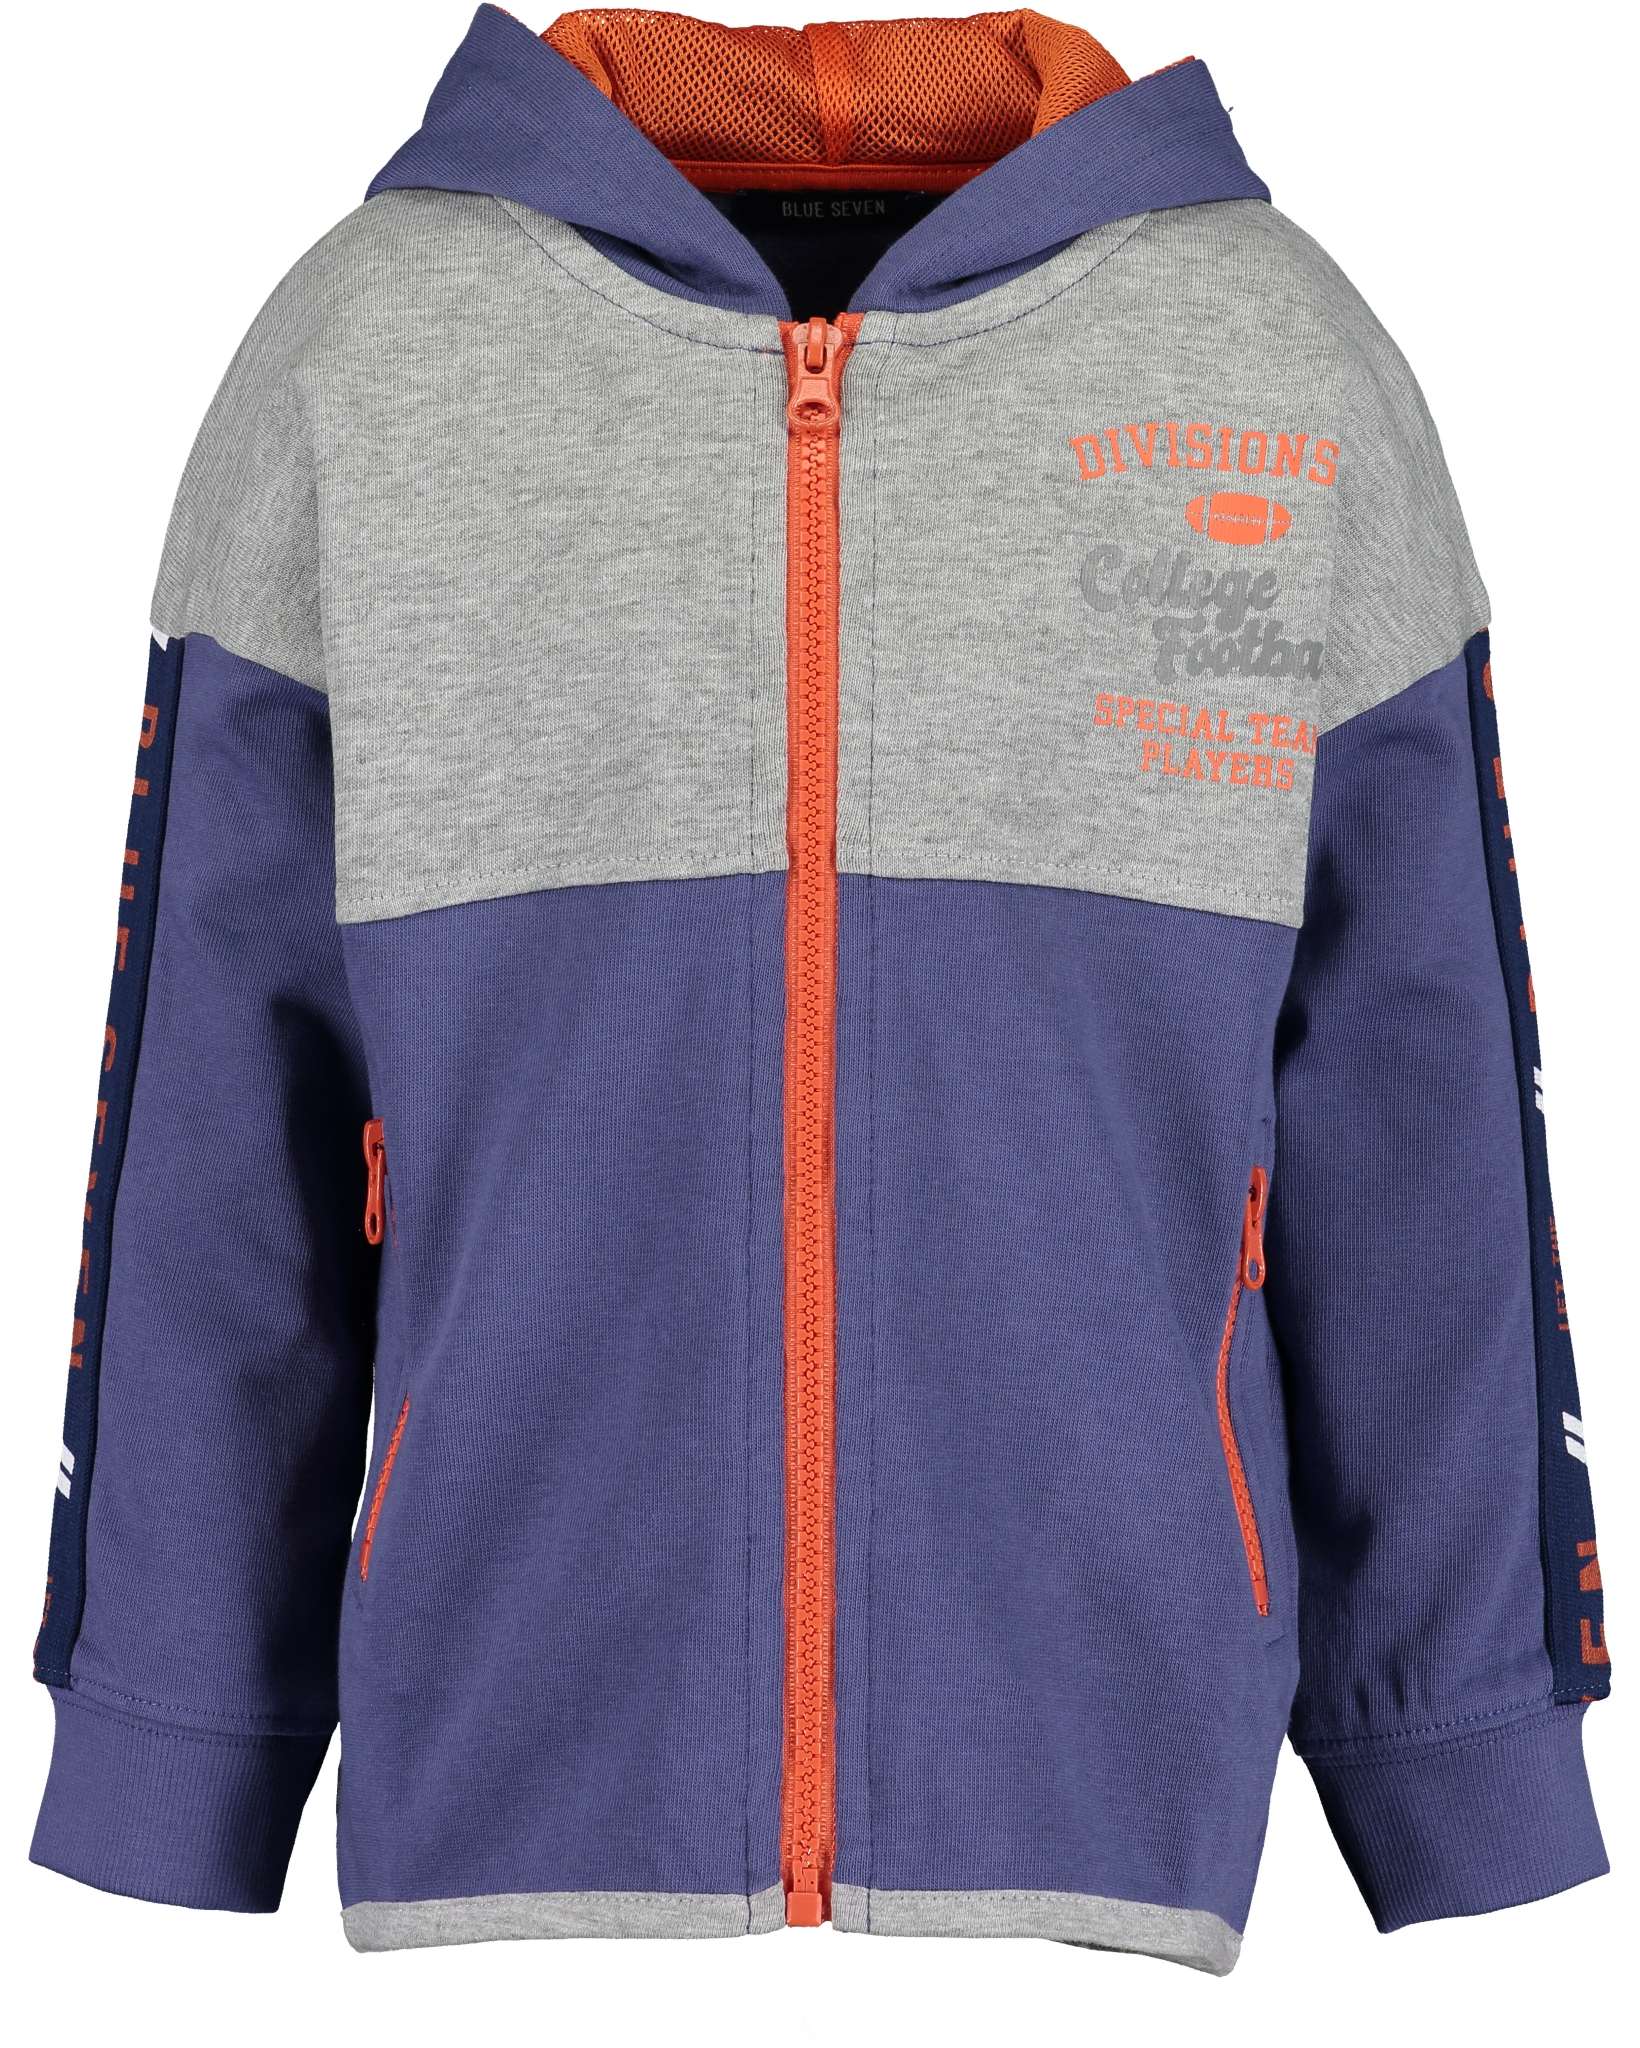 College Style Grey Football Hooded Jacket - Nana B Baby & Childrenswear Boutique